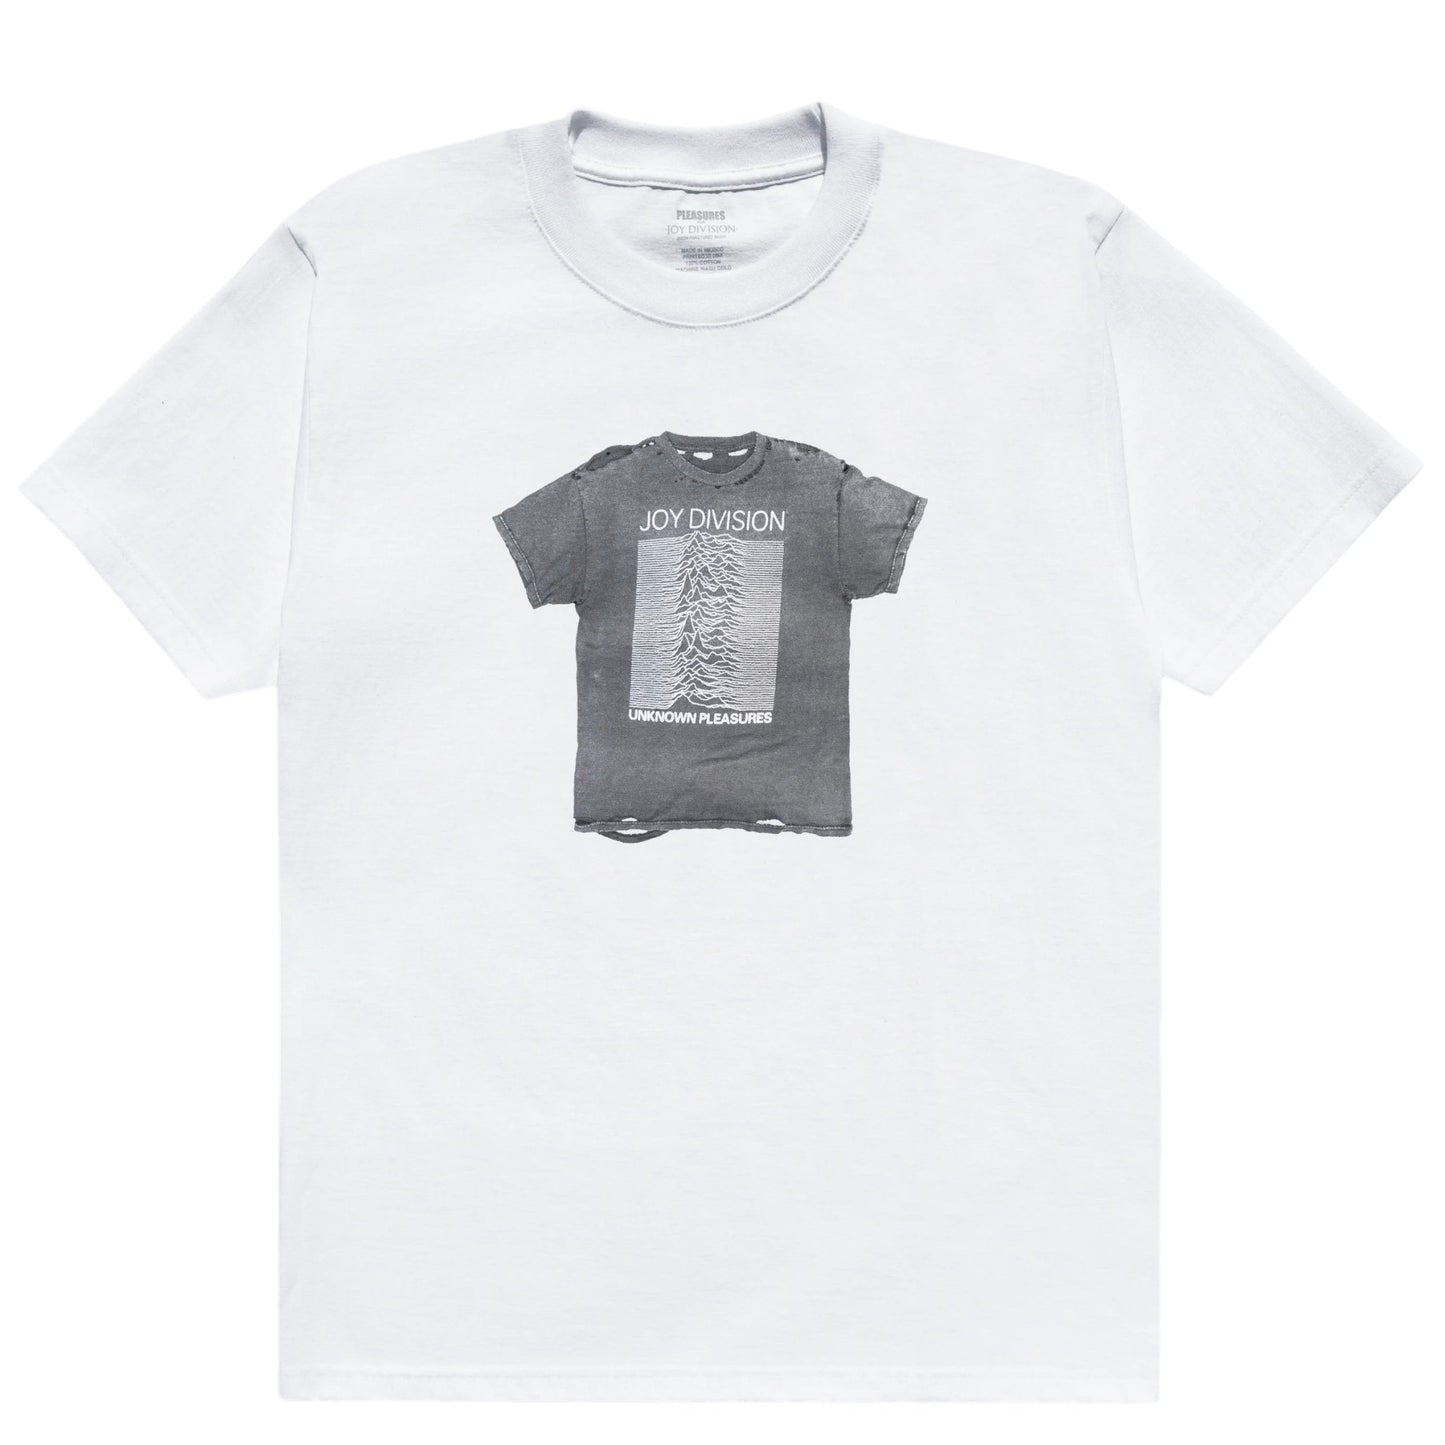 White cotton PLEASURES BROKEN IN T-SHIRT WHT with a screen-printed Joy Division band graphic print.